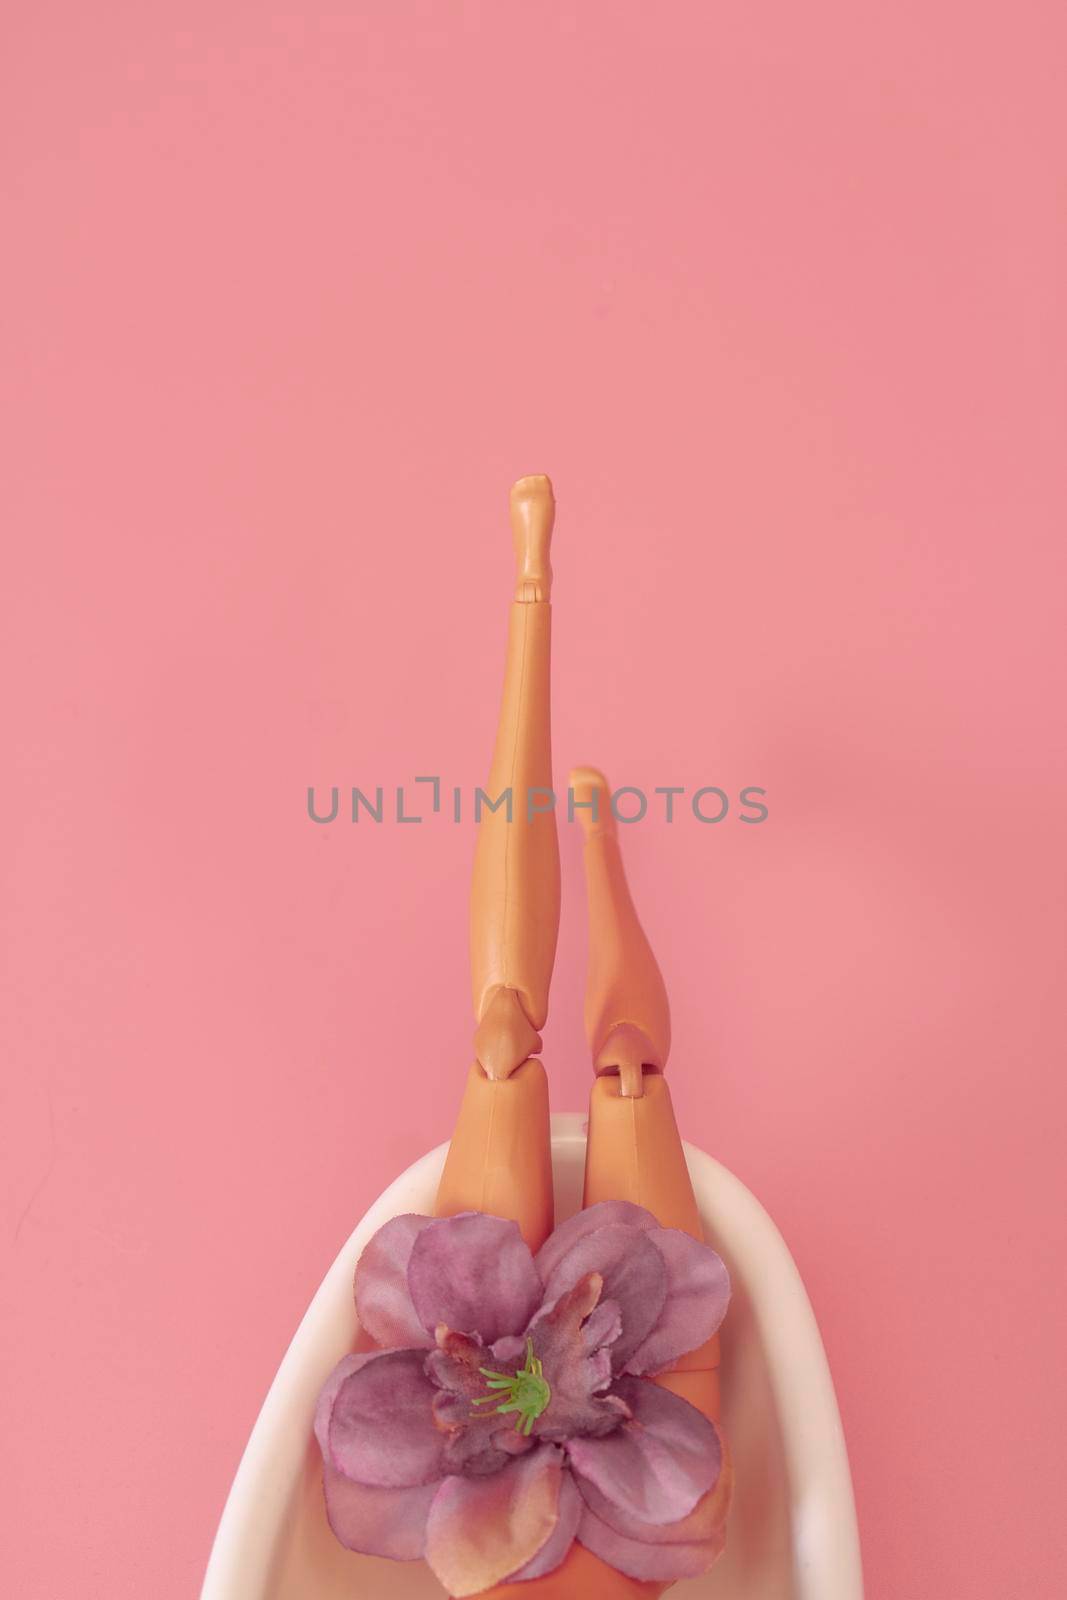 Doll bathing in a bathroom on a pink background. Creative minimal beauty summer concept. Side view.